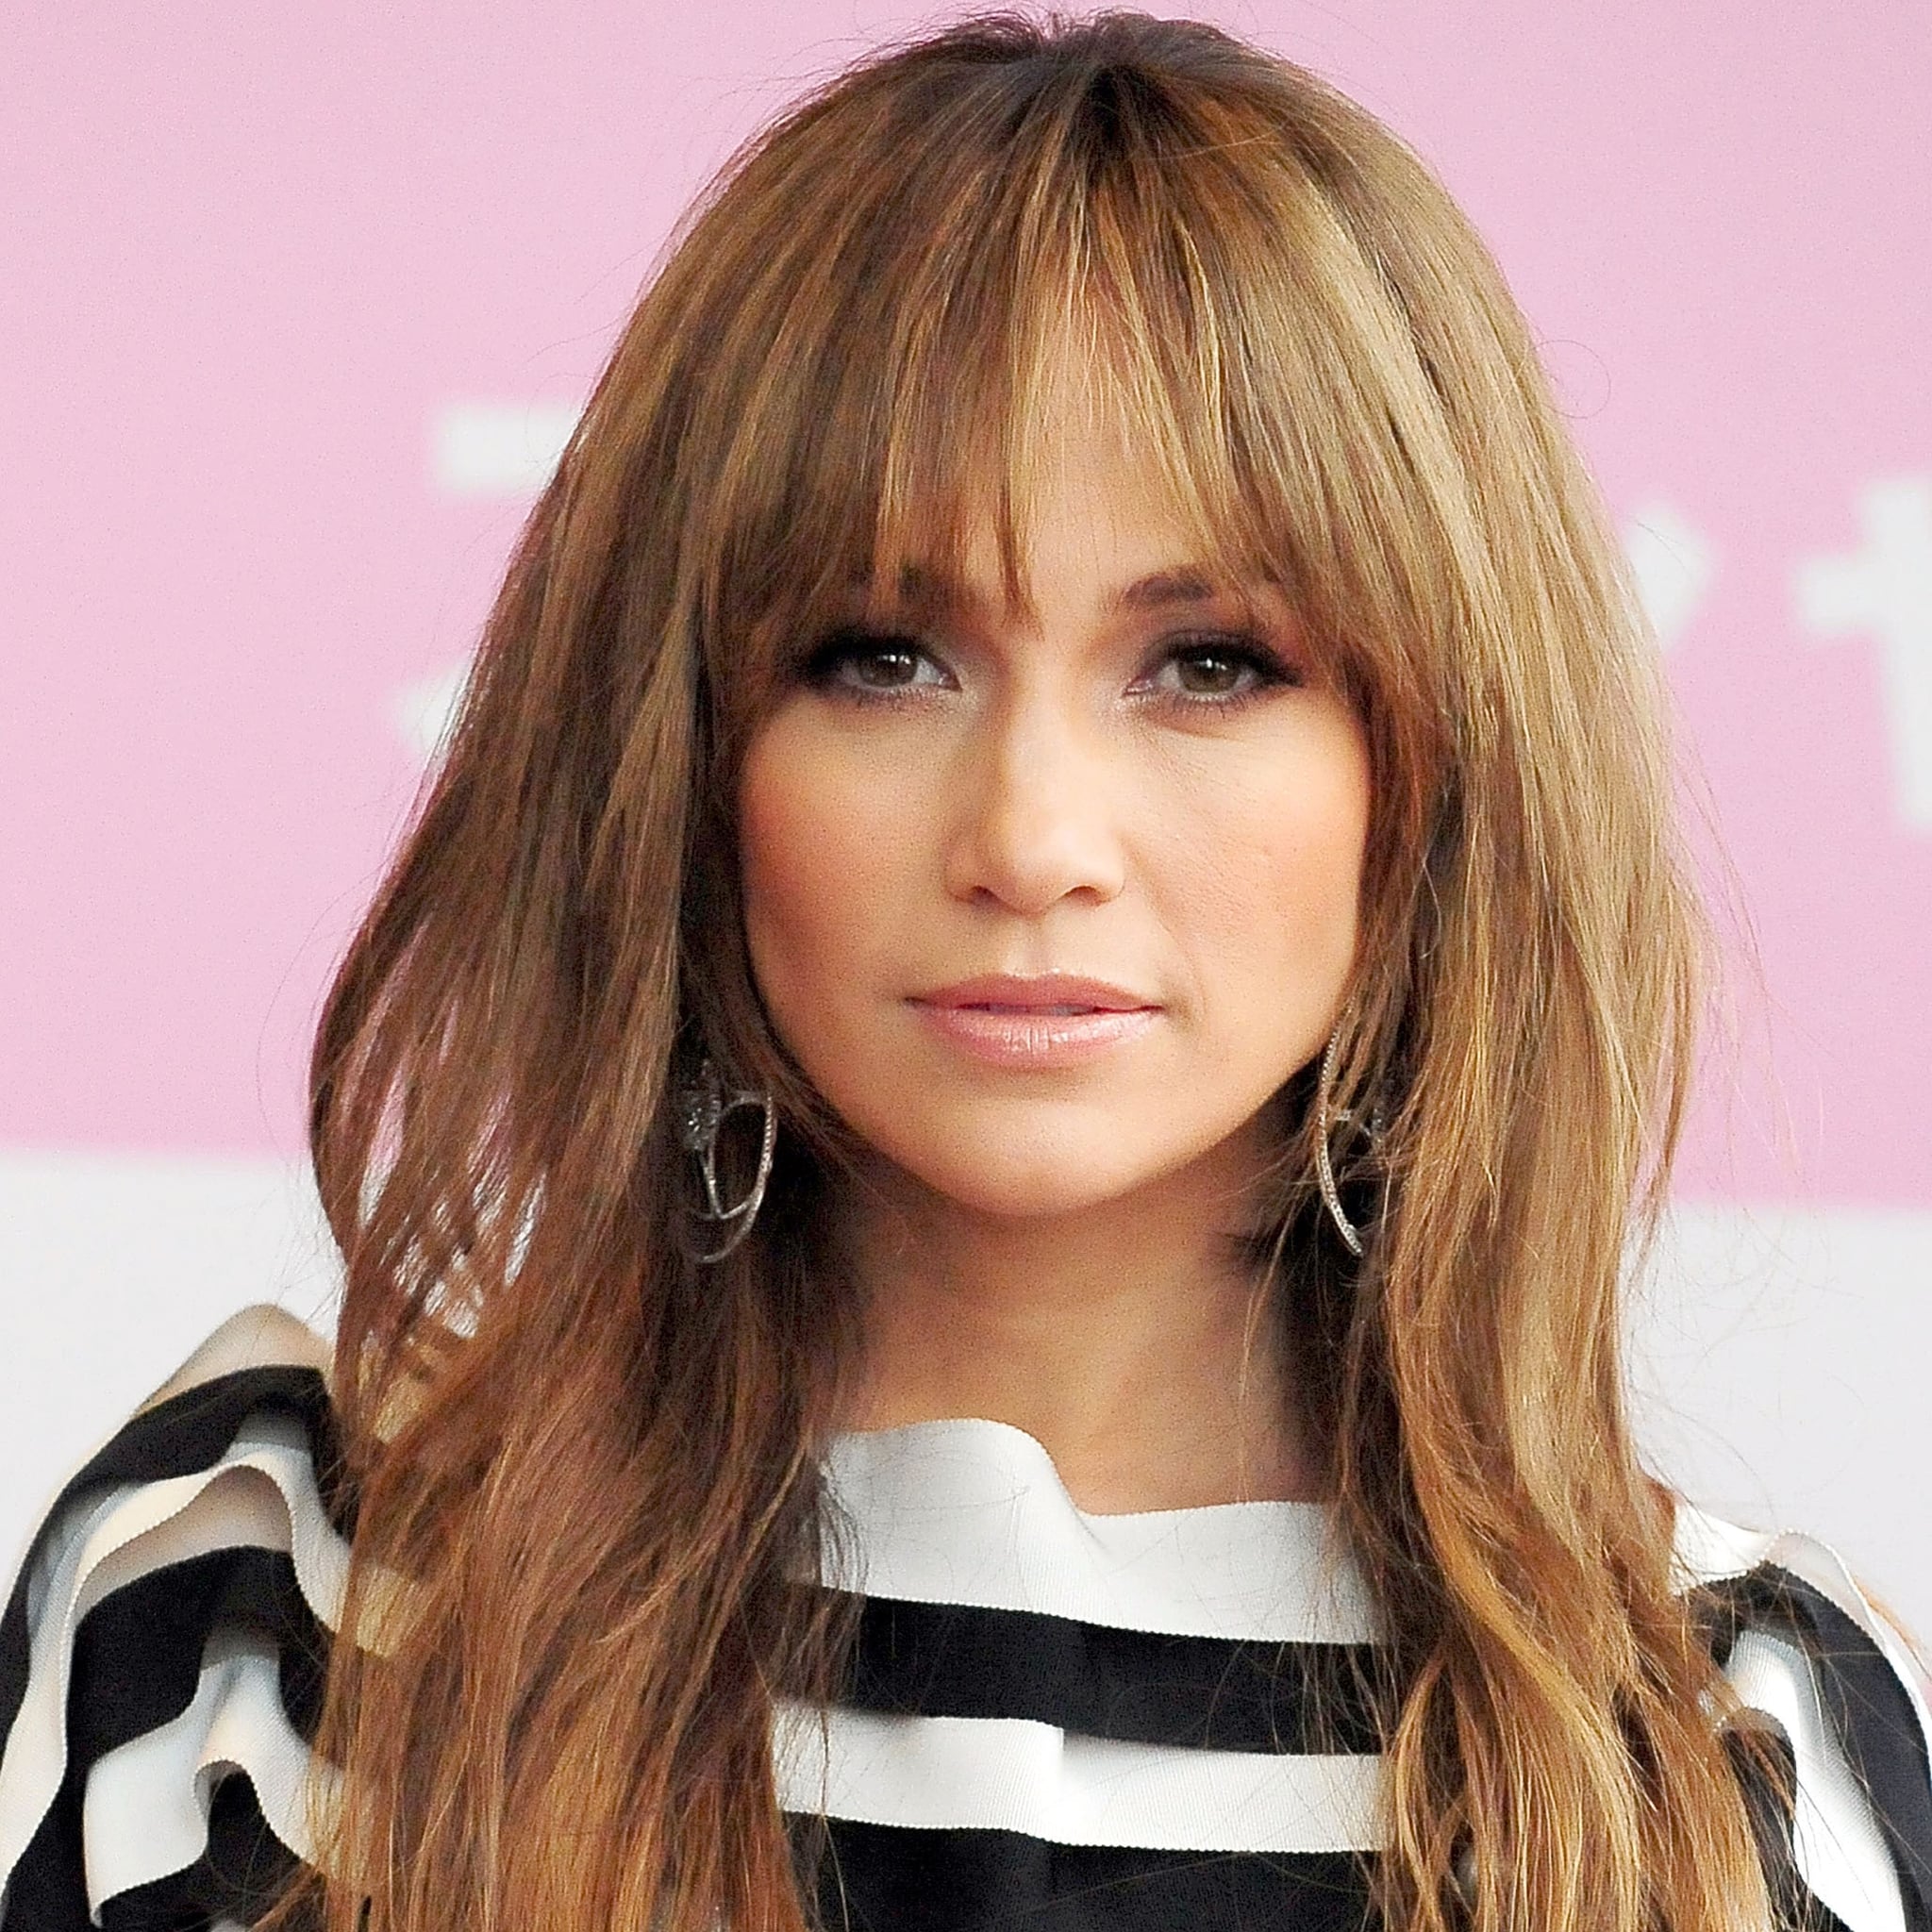 Jlo Hairstyles Top 10 Hairstyles Of Jennifer Lopez Making